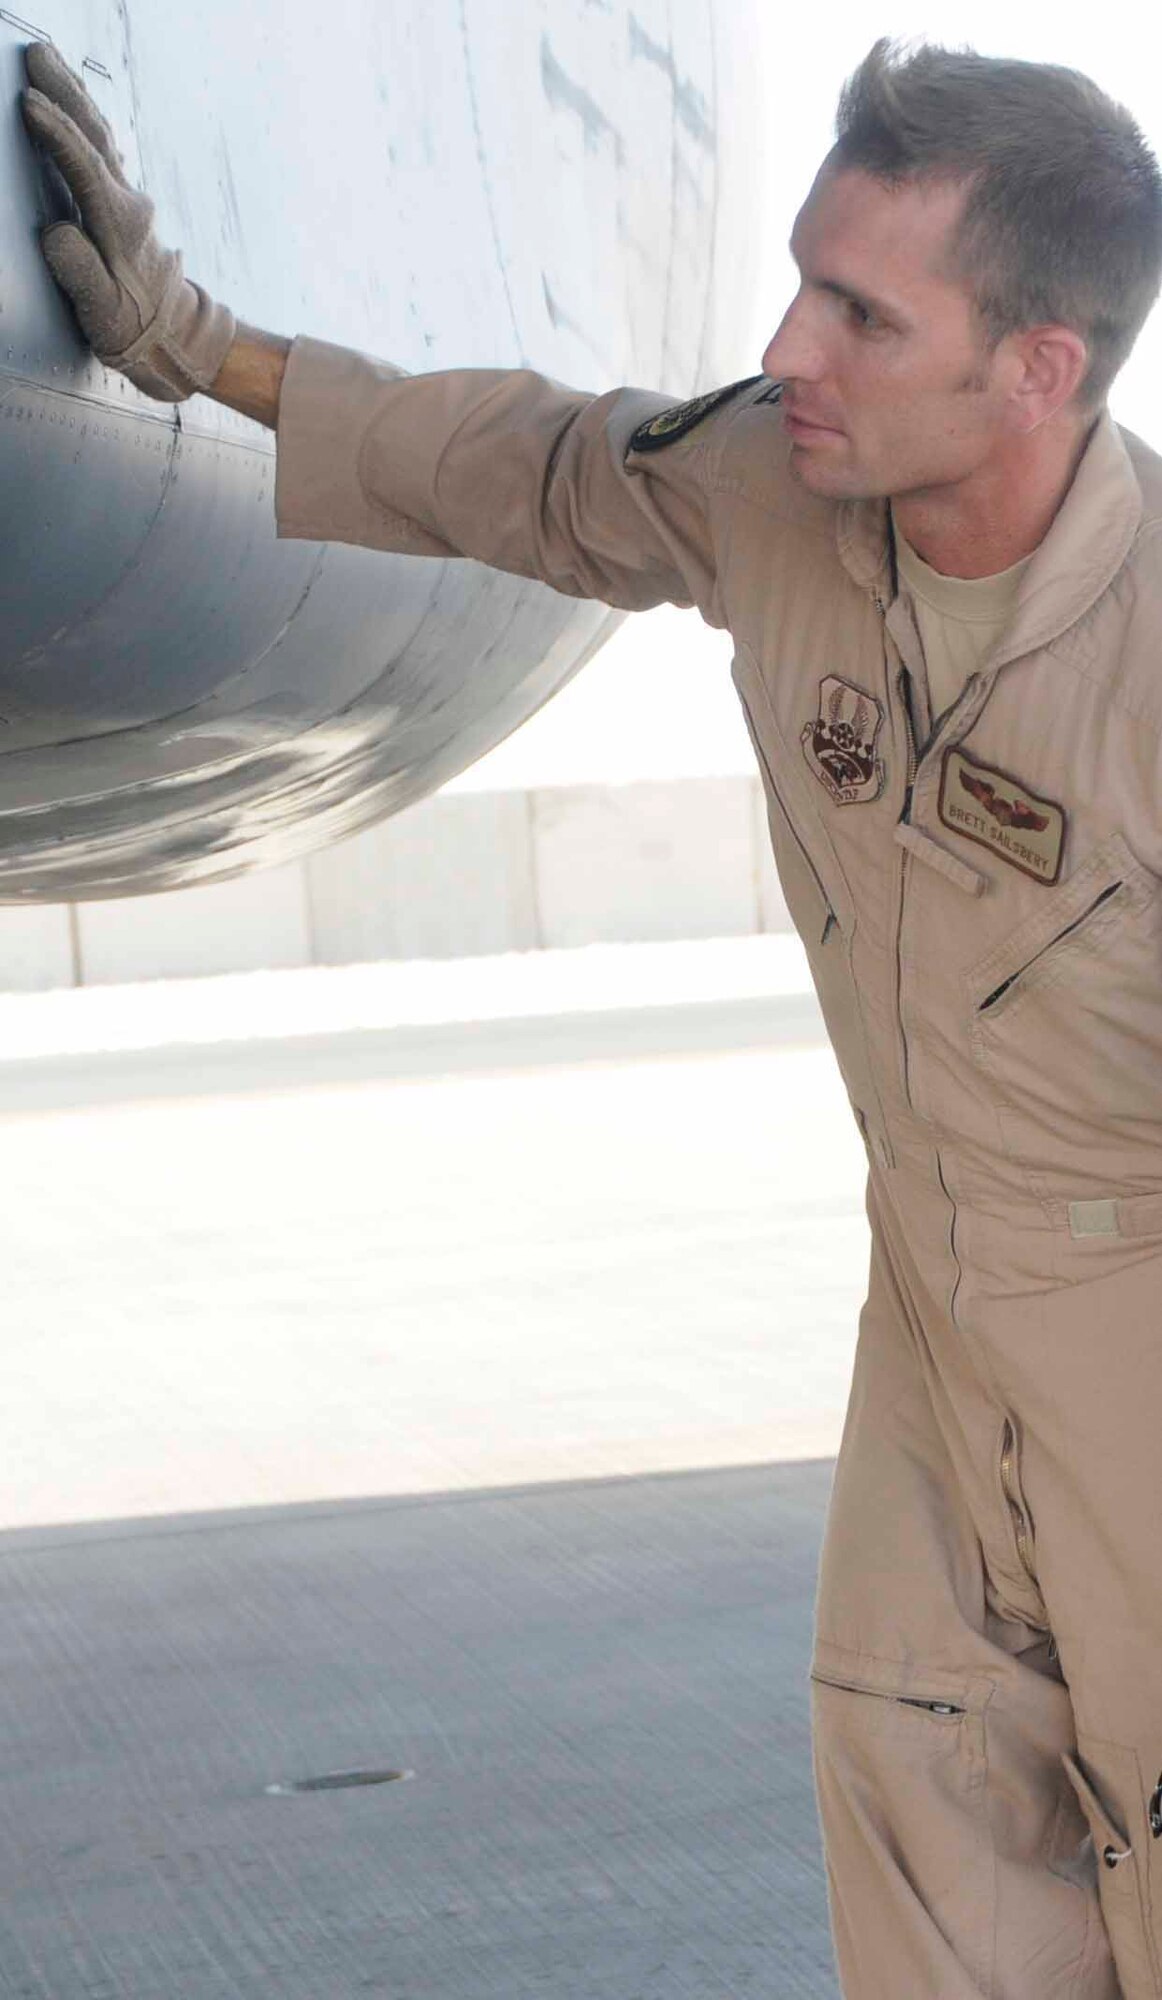 SOUTHWEST ASIA-- Capt. Brett Sailsbery, 37th Expeditionary Bomb Squadron, examines the sides of an intake on a B-1 bomber as part of his pre-flight checks June 5.